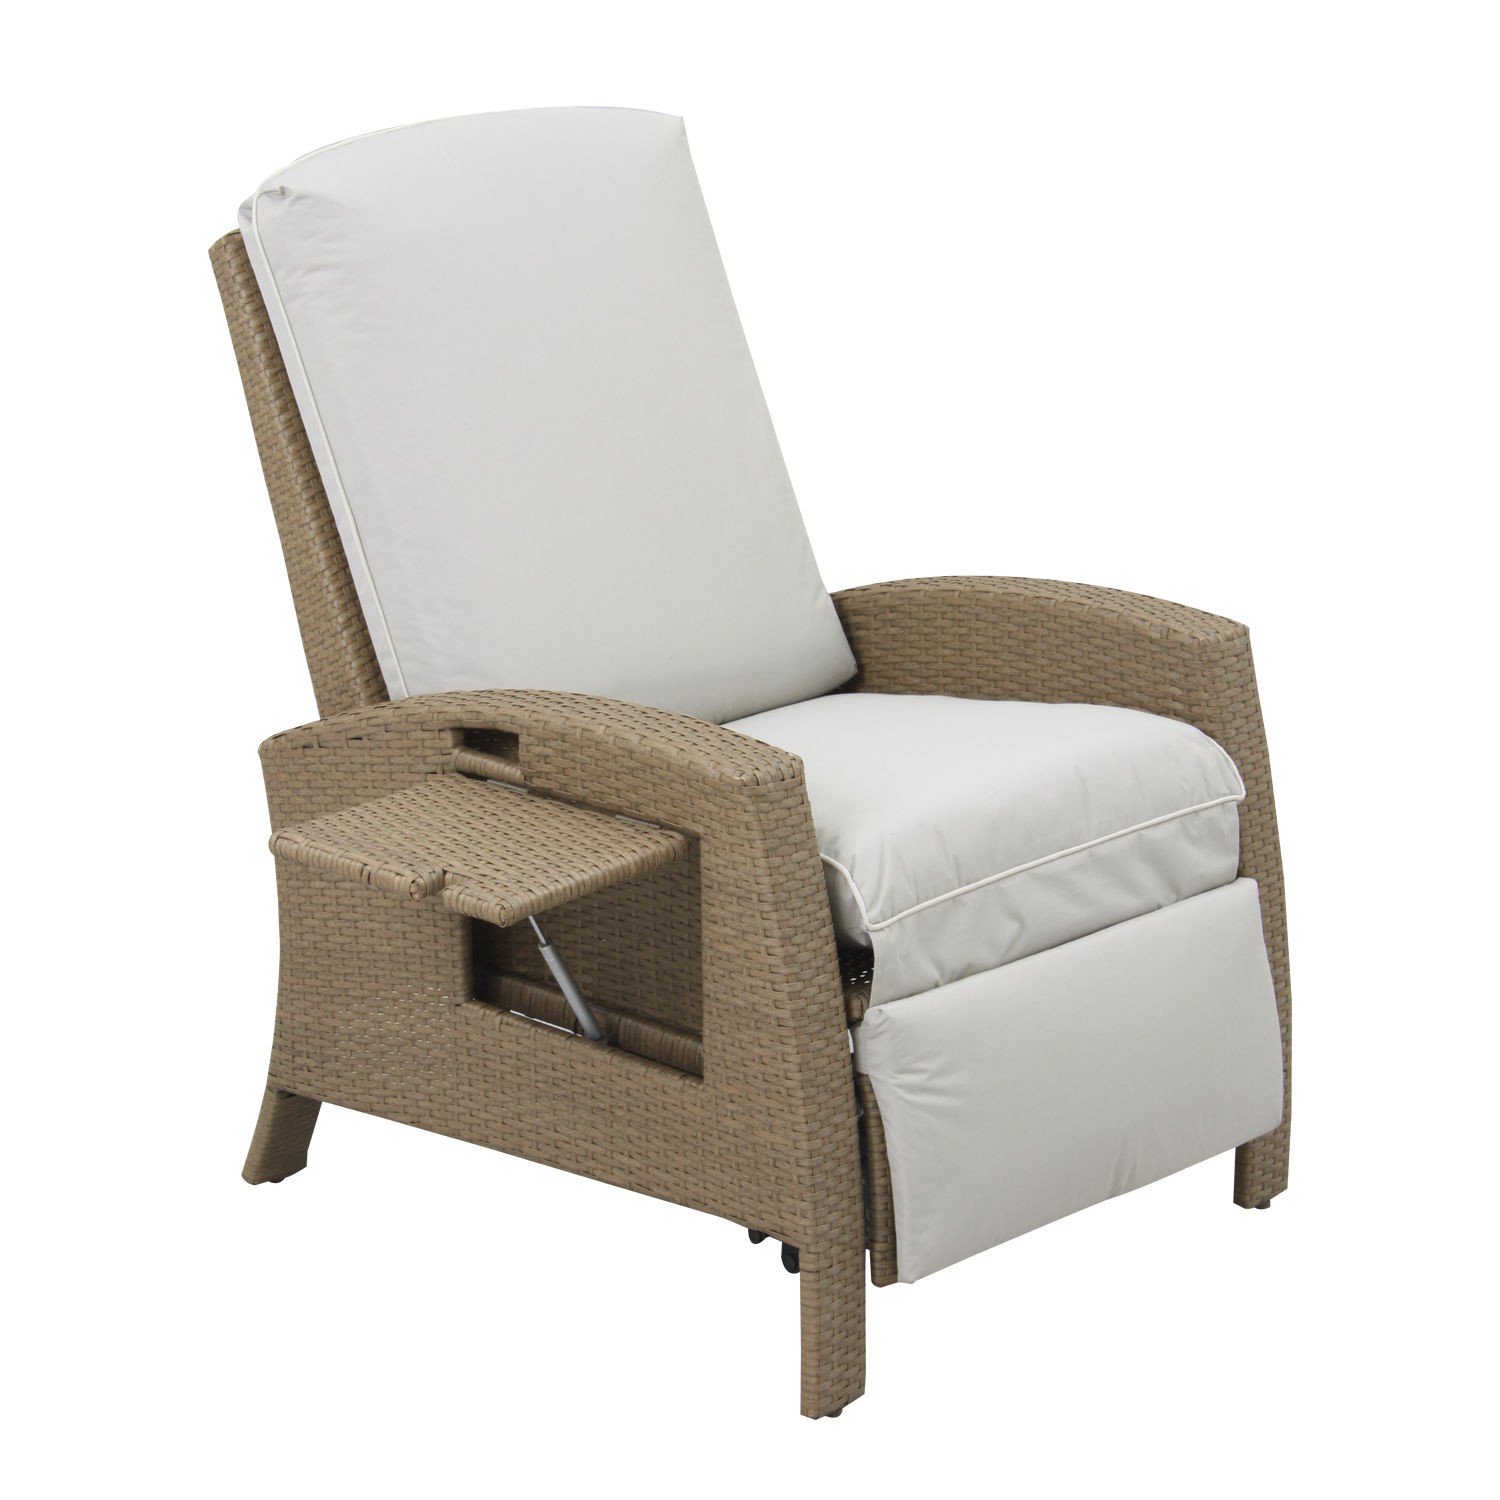 Rattan Outdoor Lounge Chair photo - 1